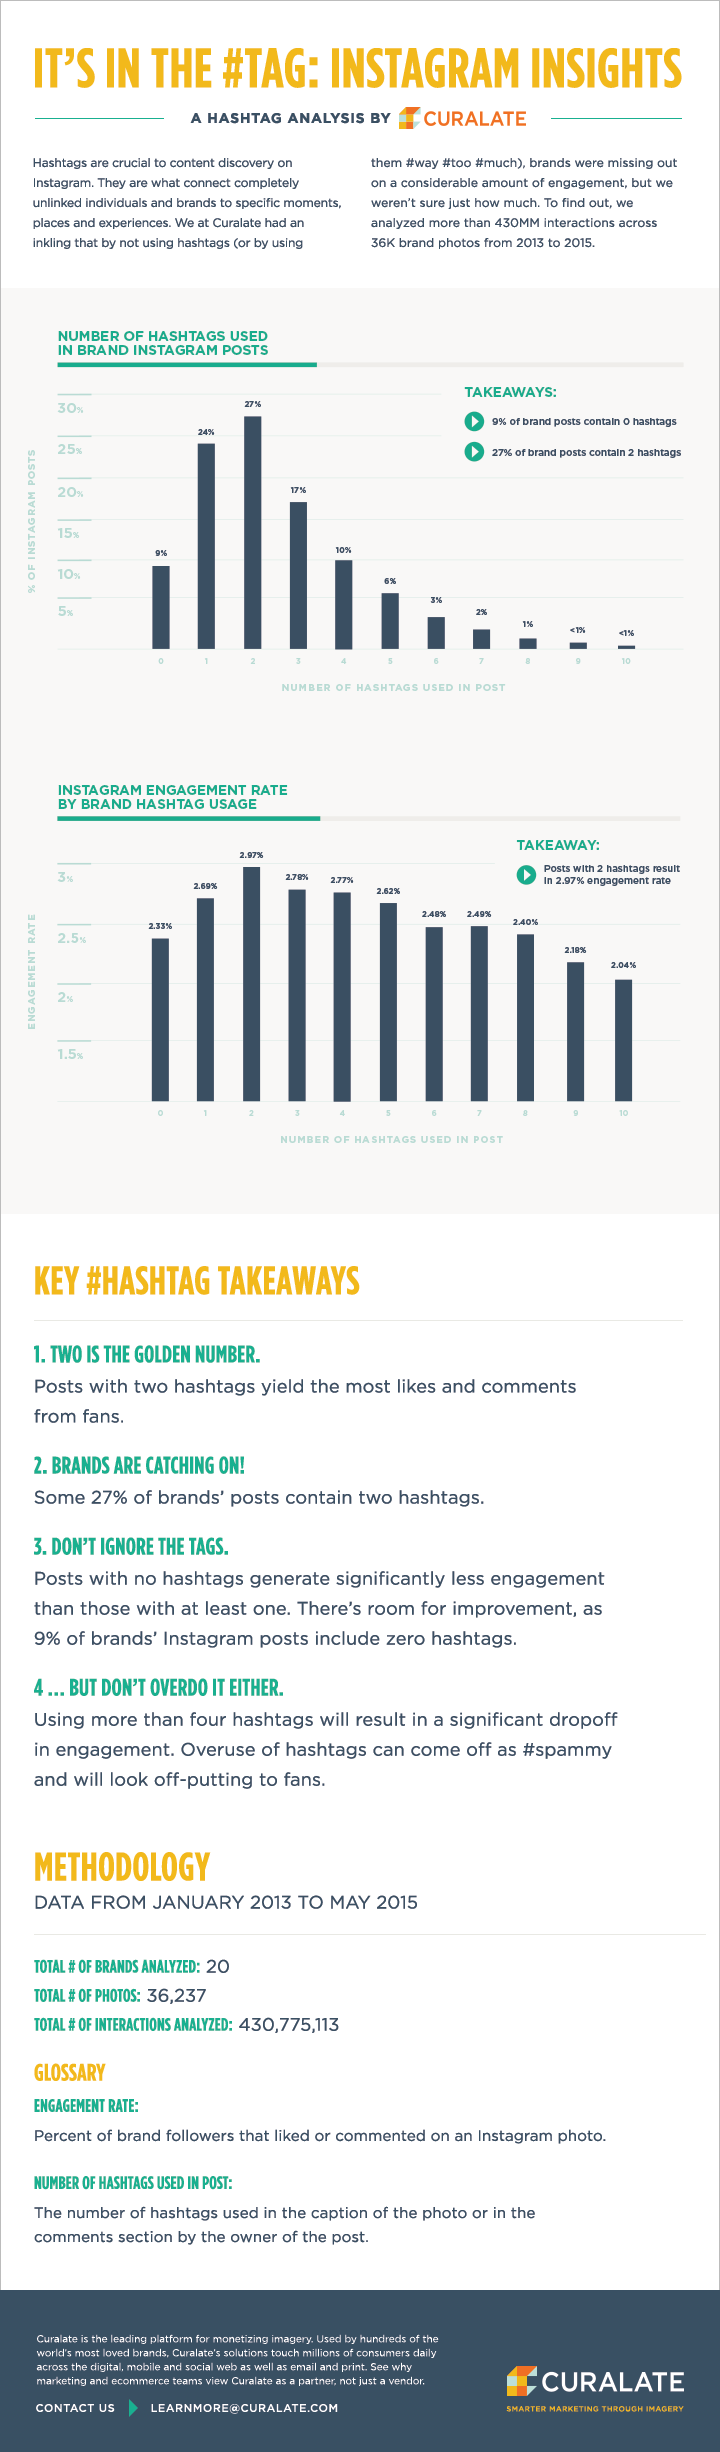 It’s in the #Tag: How Hashtags Impact Instagram Engagement - #infographic